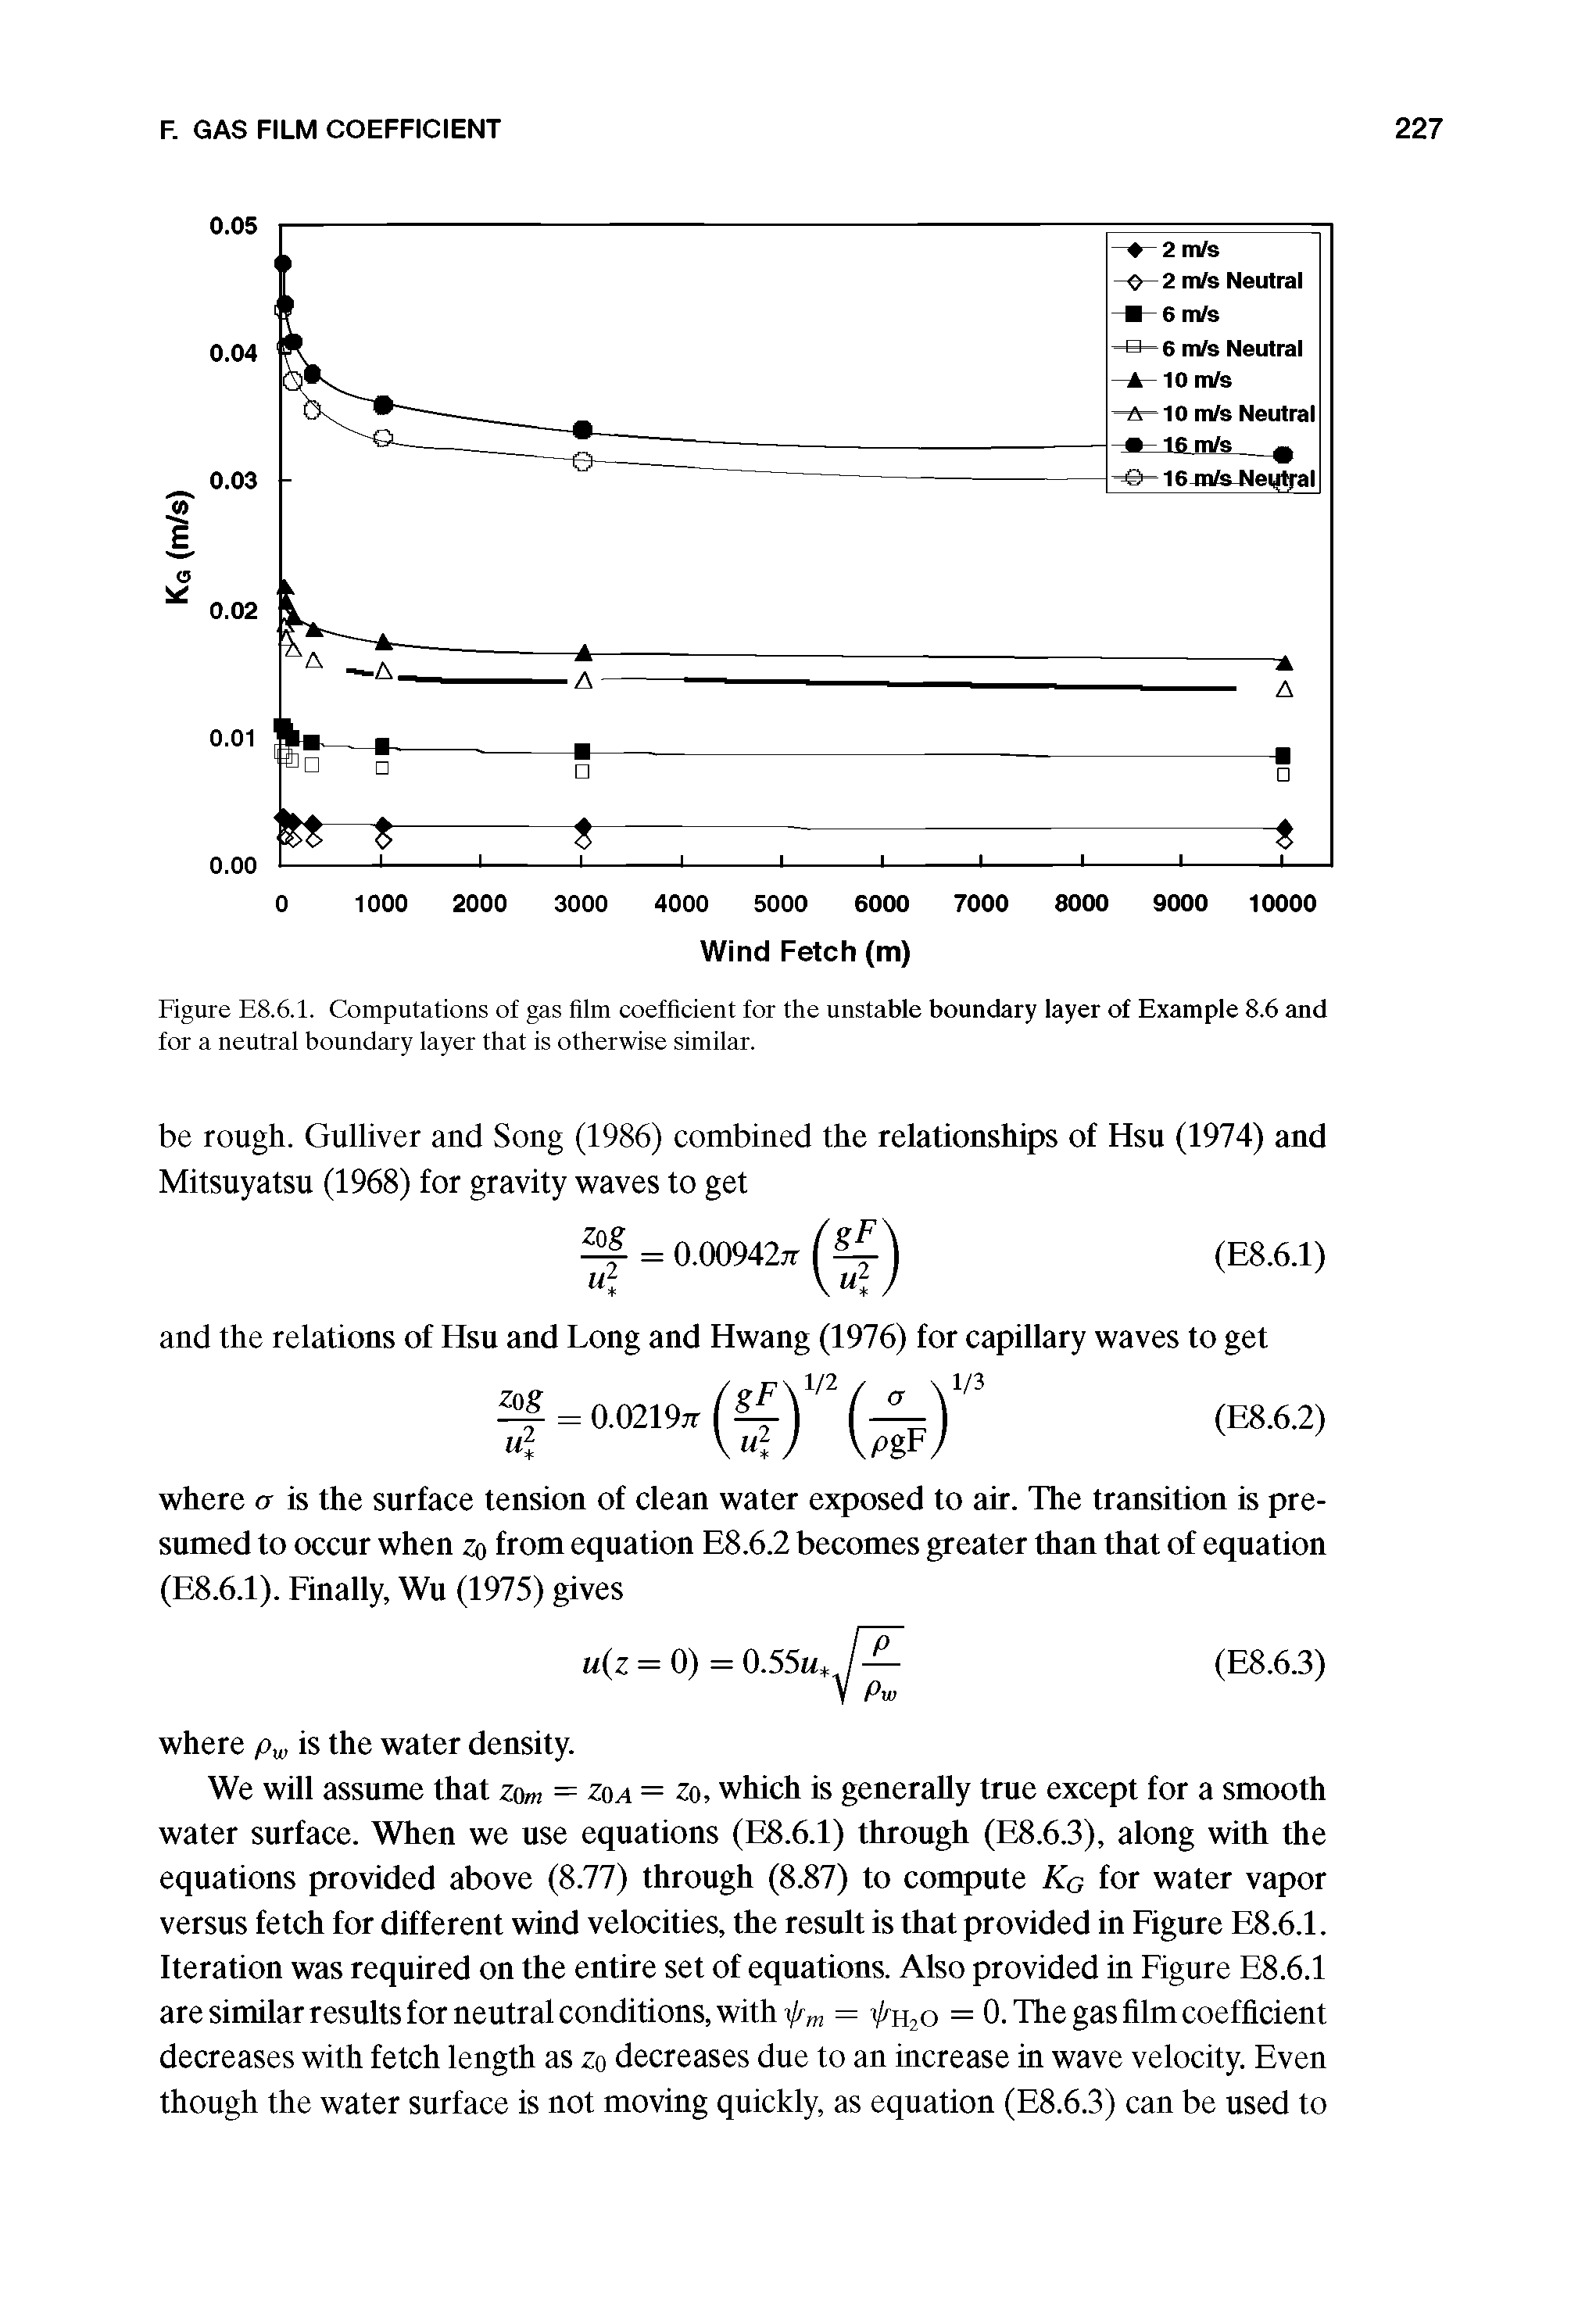 Figure E8.6.1. Computations of gas film coefficient for the unstable boundary layer of Example 8.6 and for a neutral boundary layer that is otherwise similar.